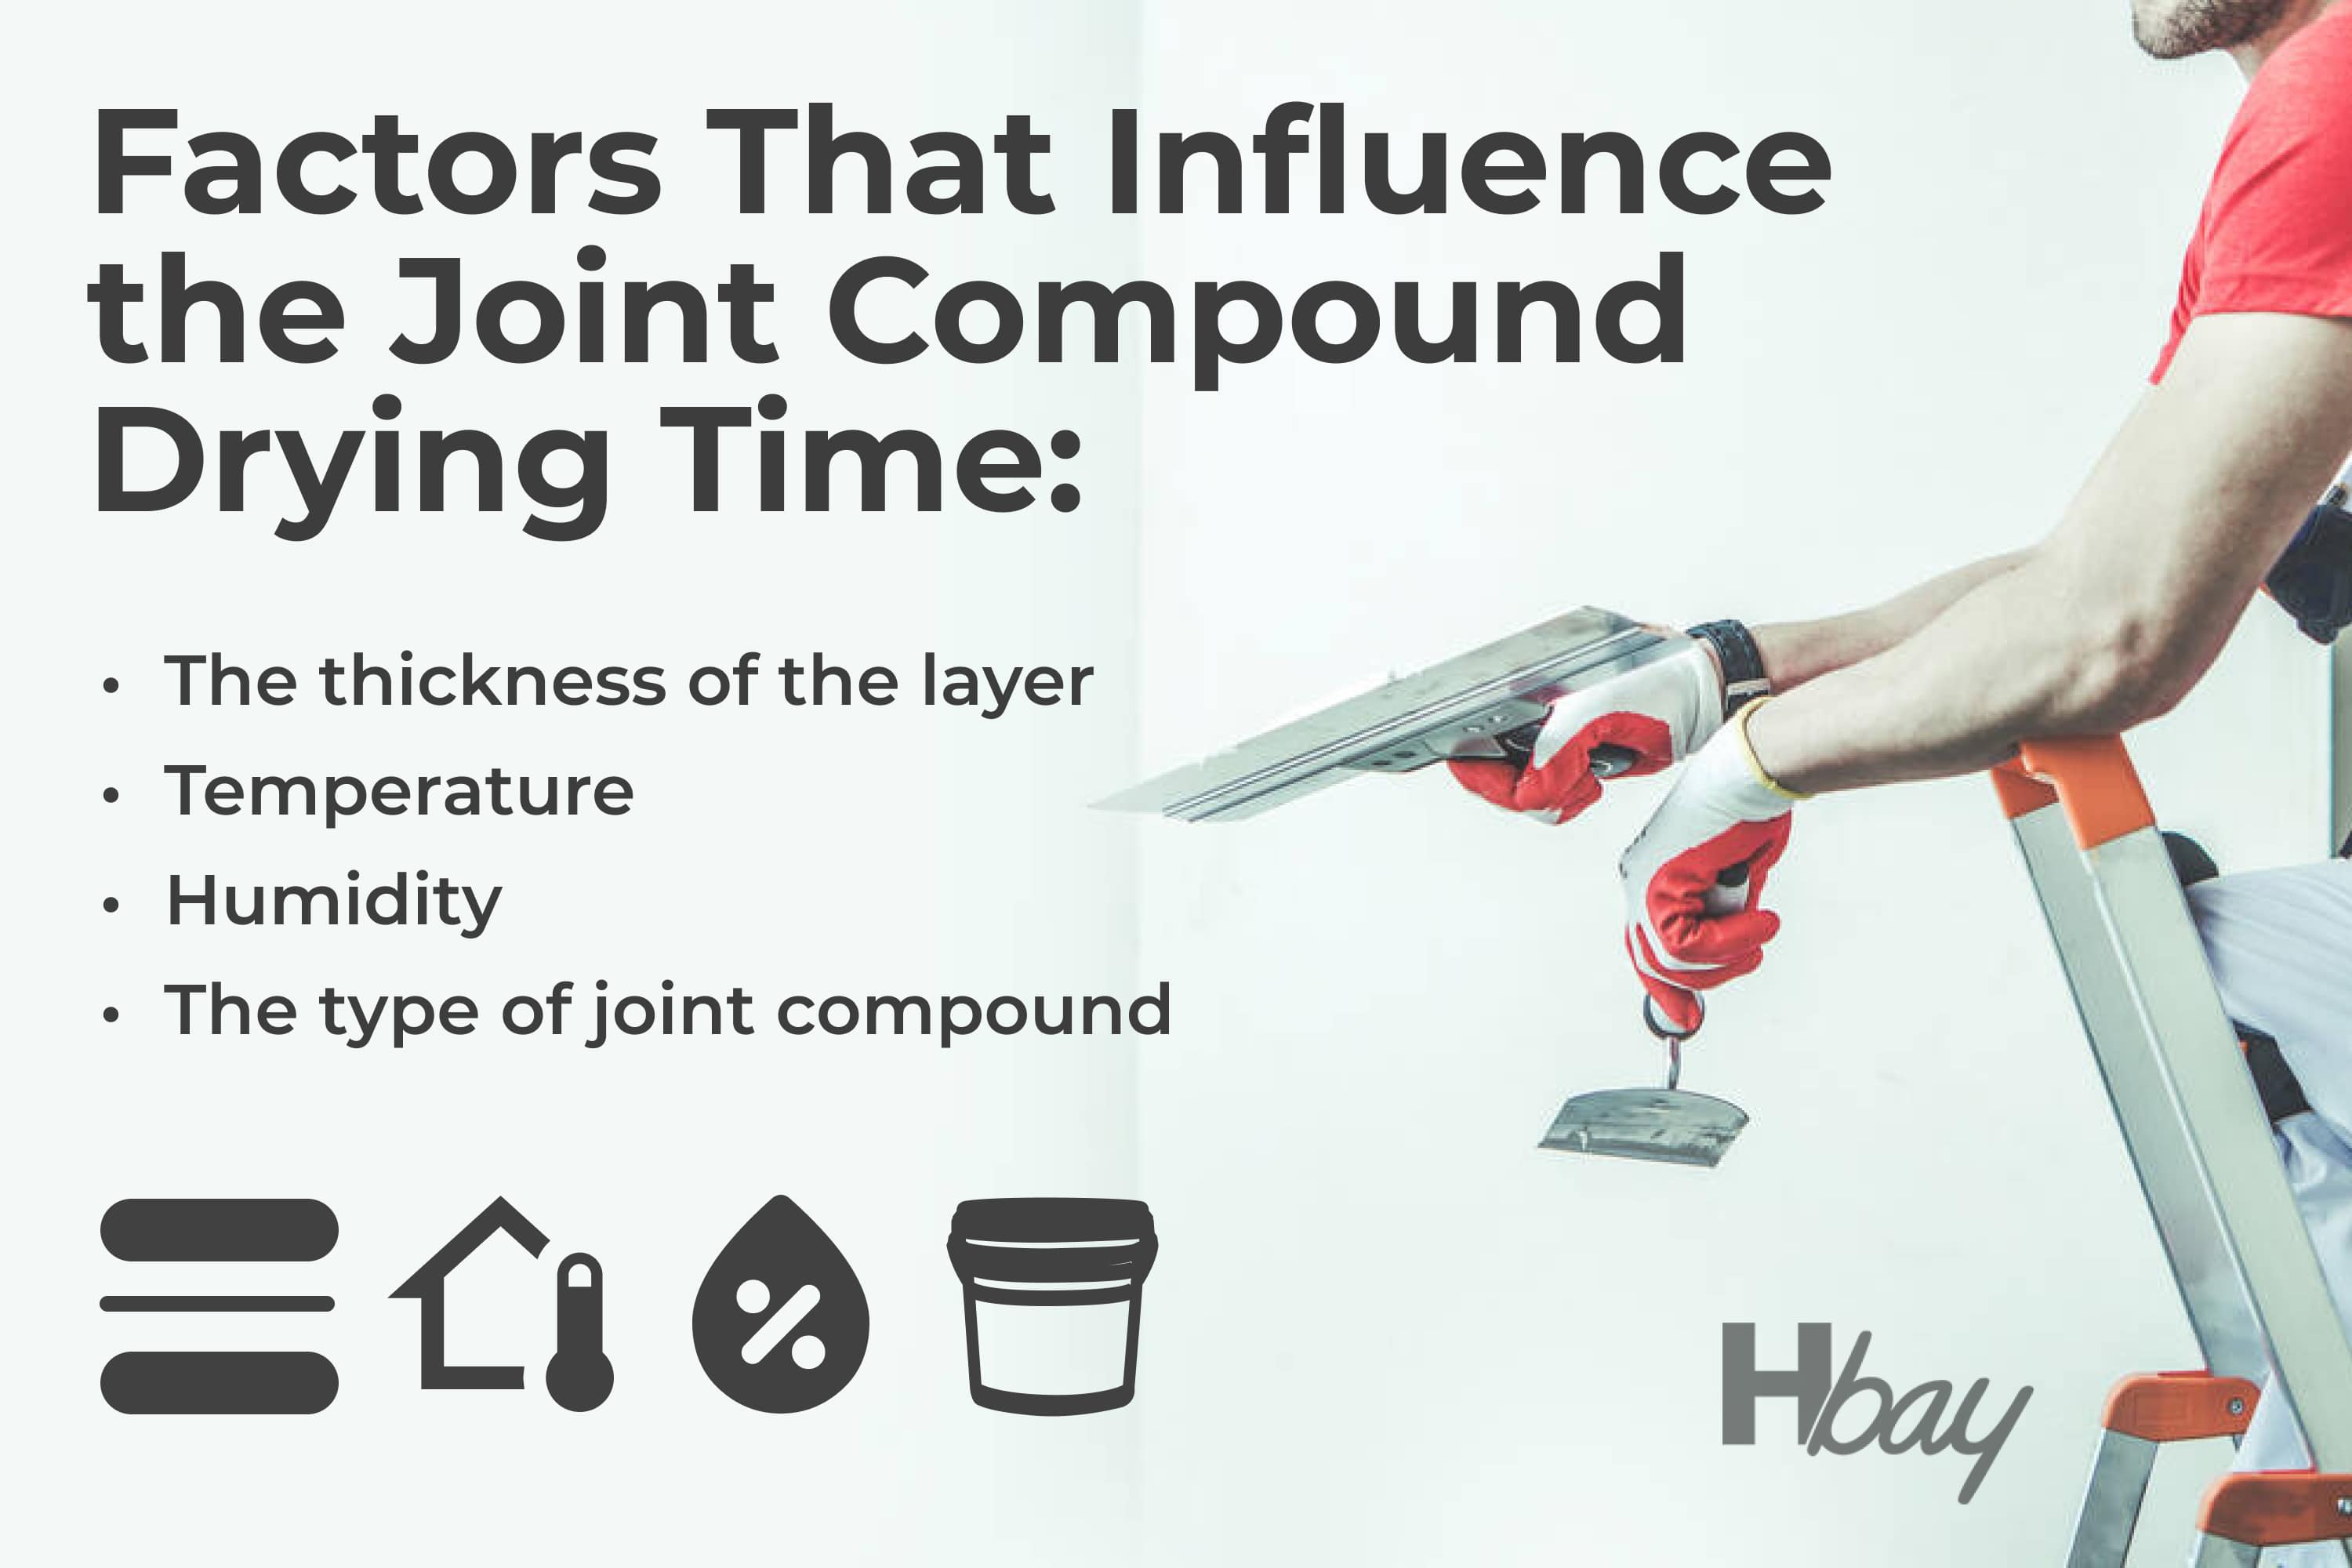 Factors That Influence the Joint Compound Drying Time